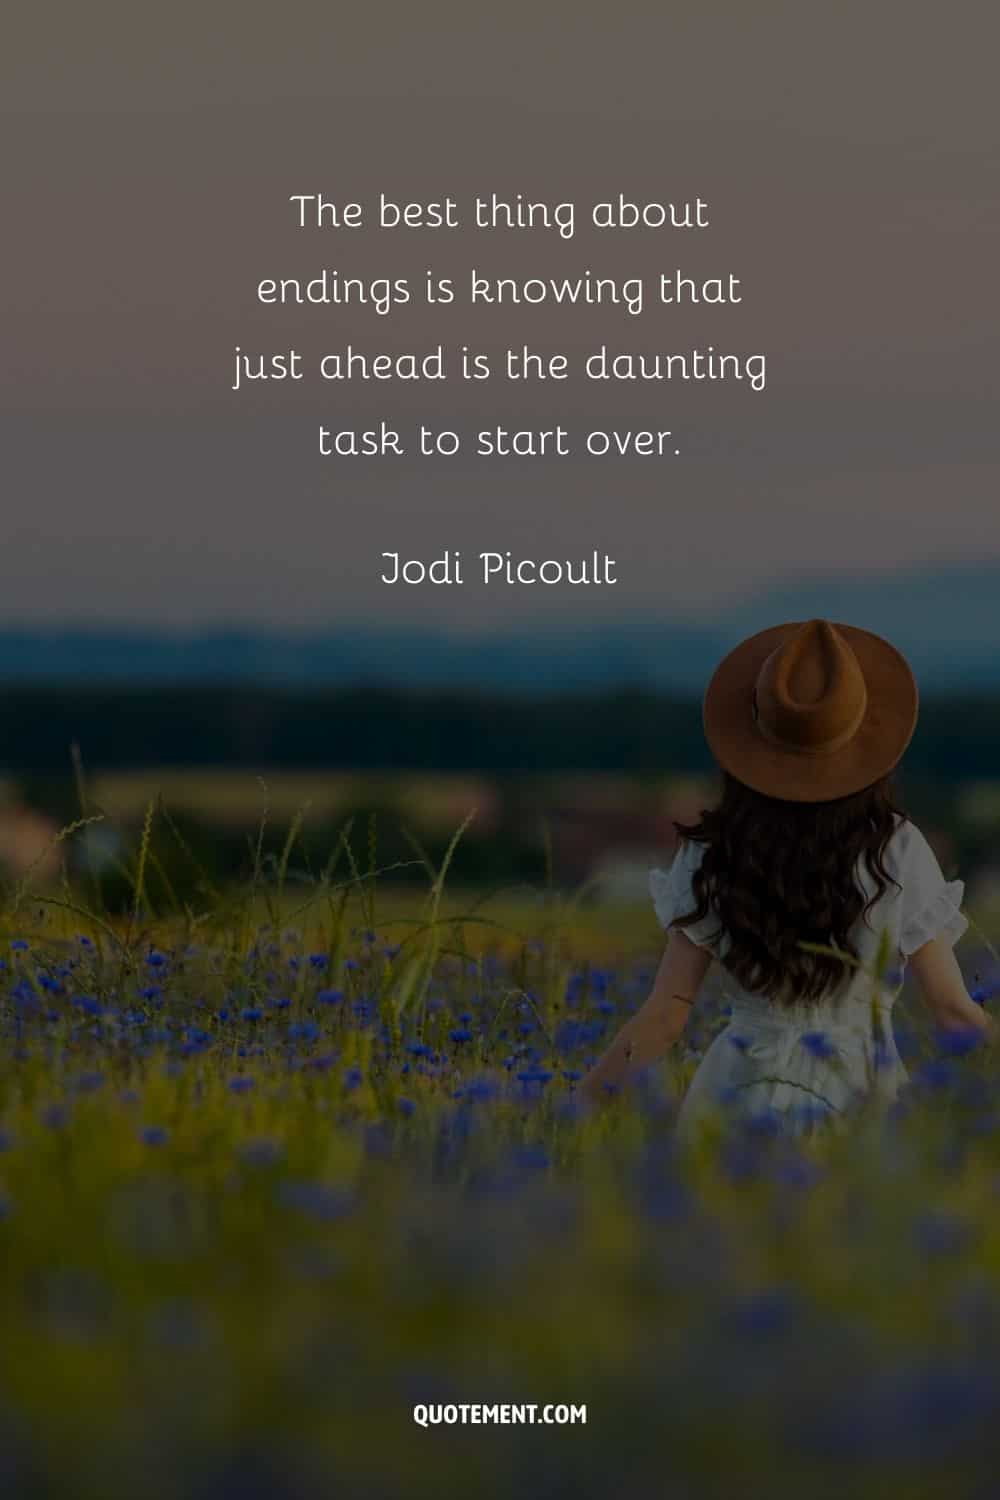 “The best thing about endings is knowing that just ahead is the daunting task to start over.” — Jodi Picoult